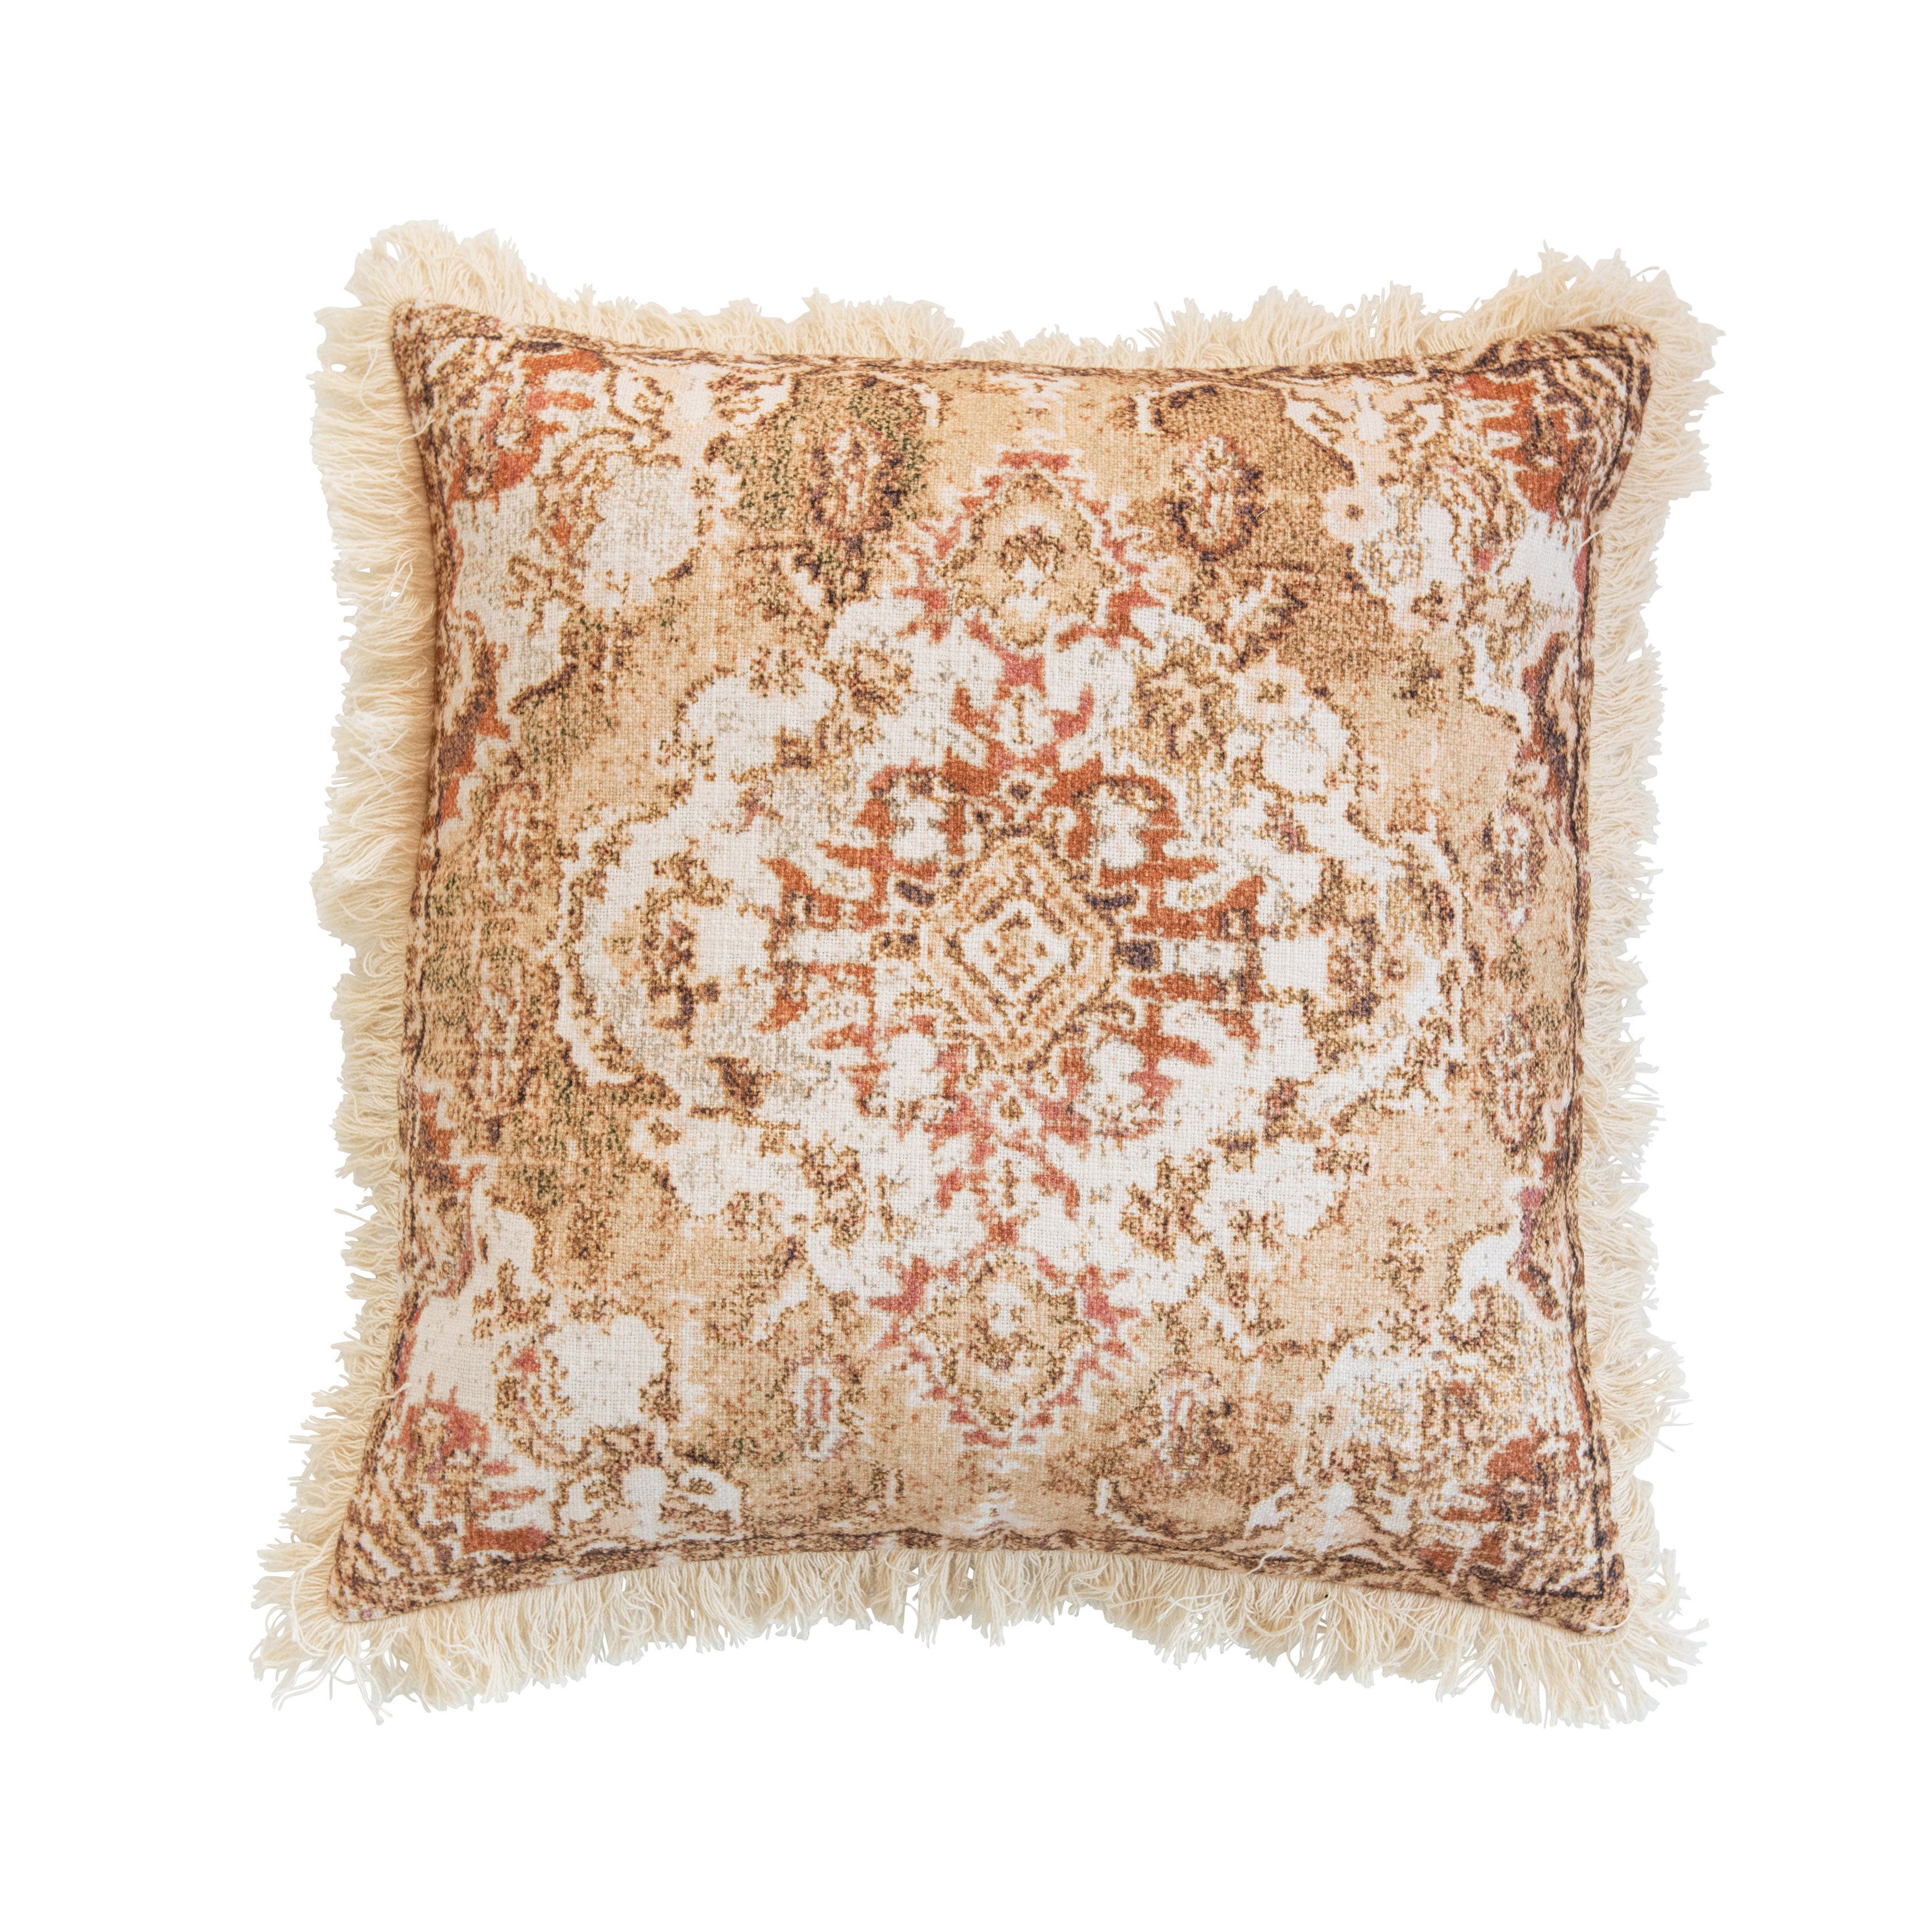 Distressed Cotton Printed Pillow with Fringe, Multi Color